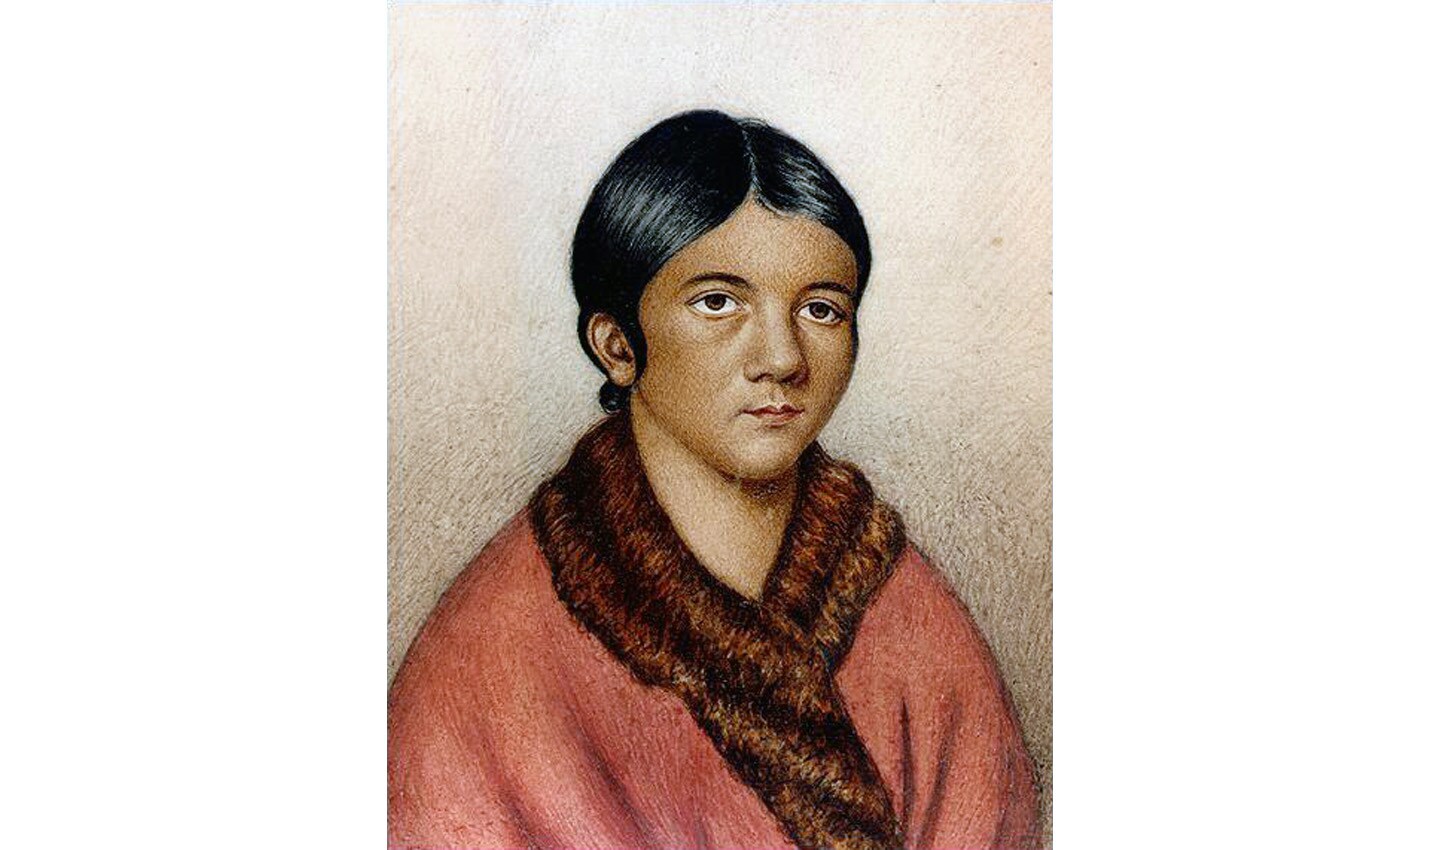 Shanawdithit was a member of the Beothuk tribe in the early 19th century.